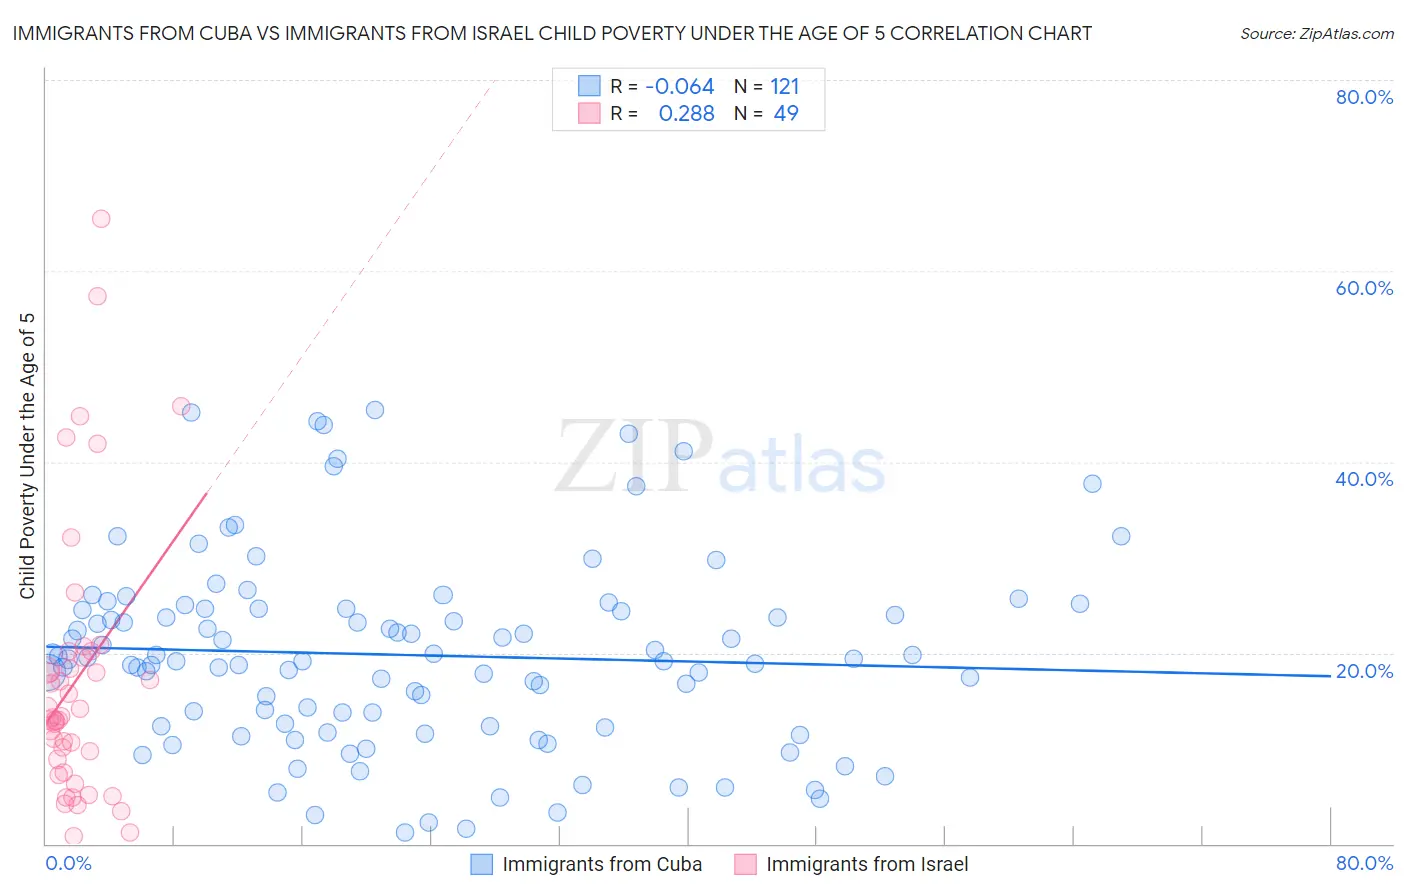 Immigrants from Cuba vs Immigrants from Israel Child Poverty Under the Age of 5